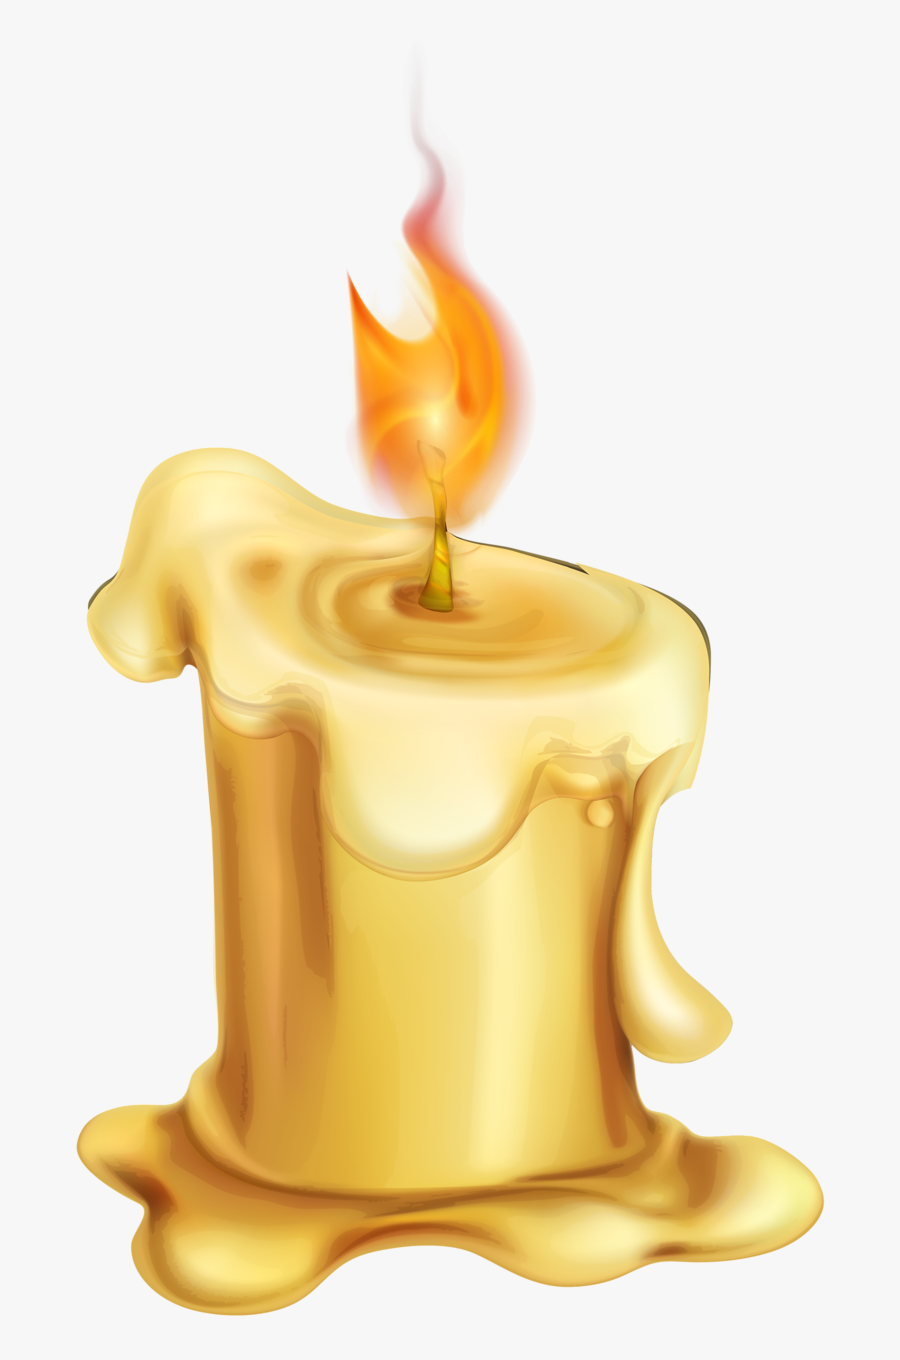 Candle Cartoon Wax - Candle Png, Transparent Clipart